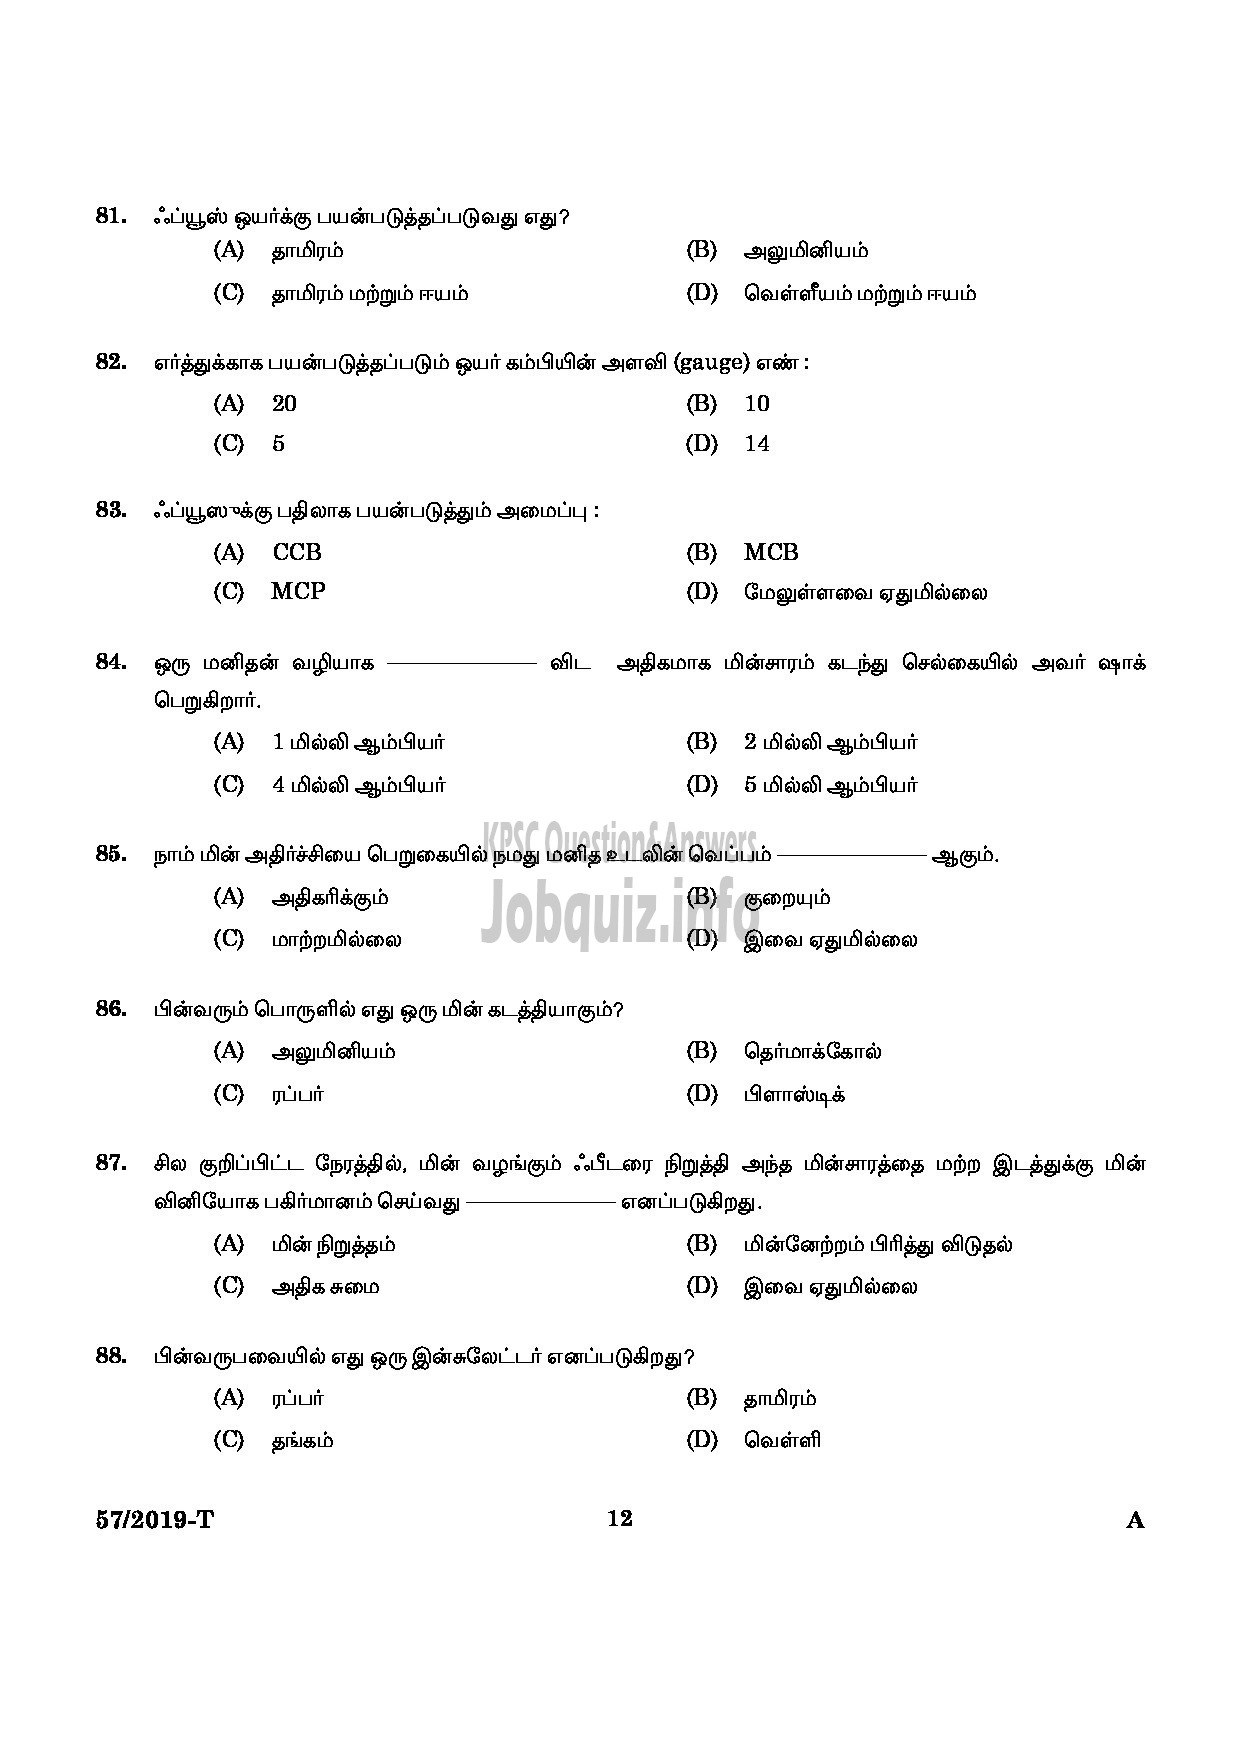 Kerala PSC Question Paper - 	POWER LAUNDRY ATTENDER MEDICAL EDUCATION TAMIL-10